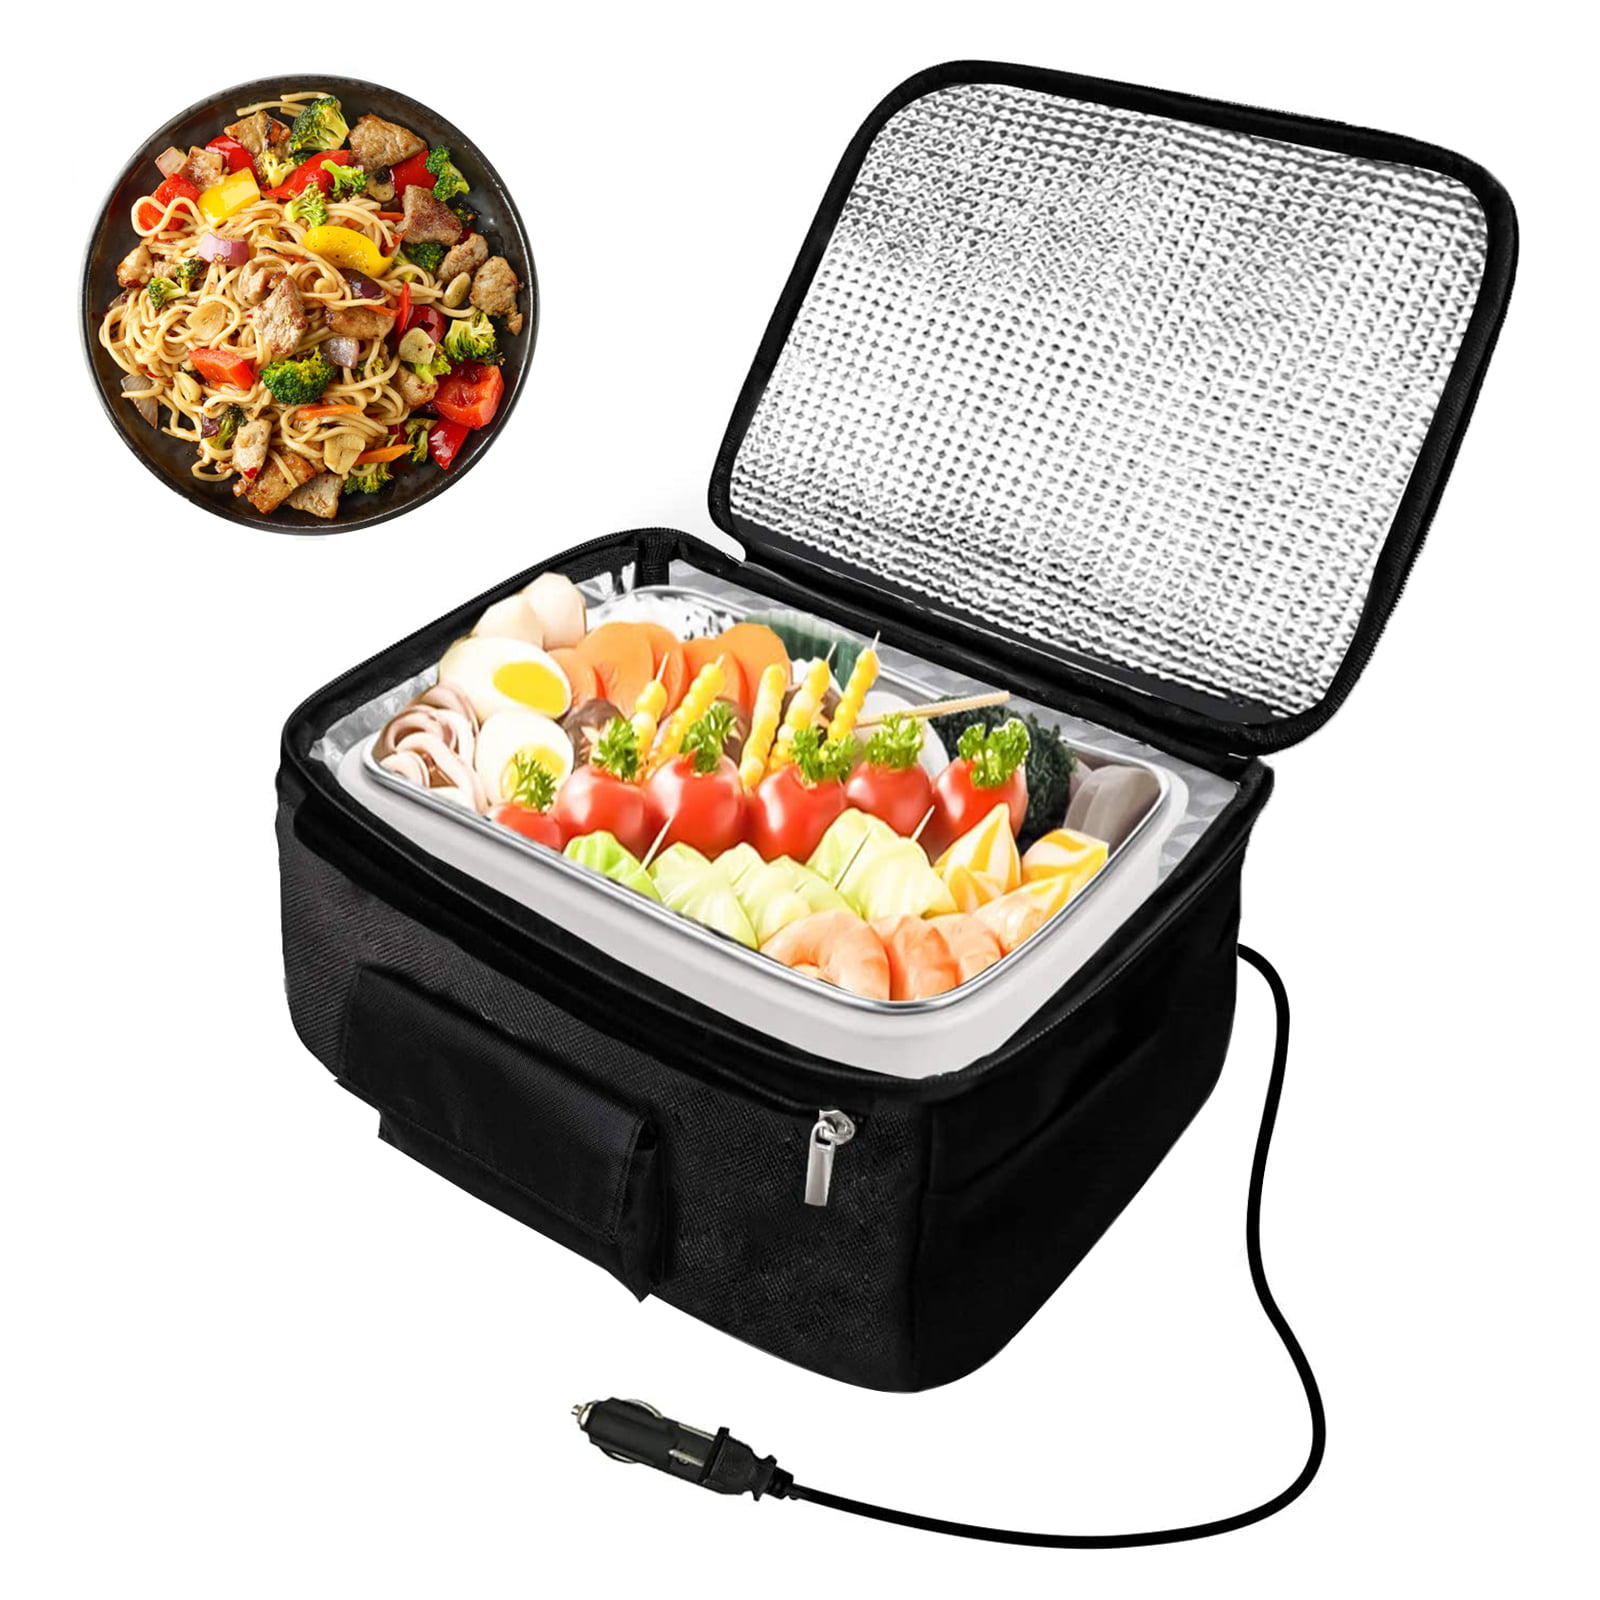 12V Car Heated Lunch Box Car Electric Lunch Container Food Warmer Car Stove Oven 